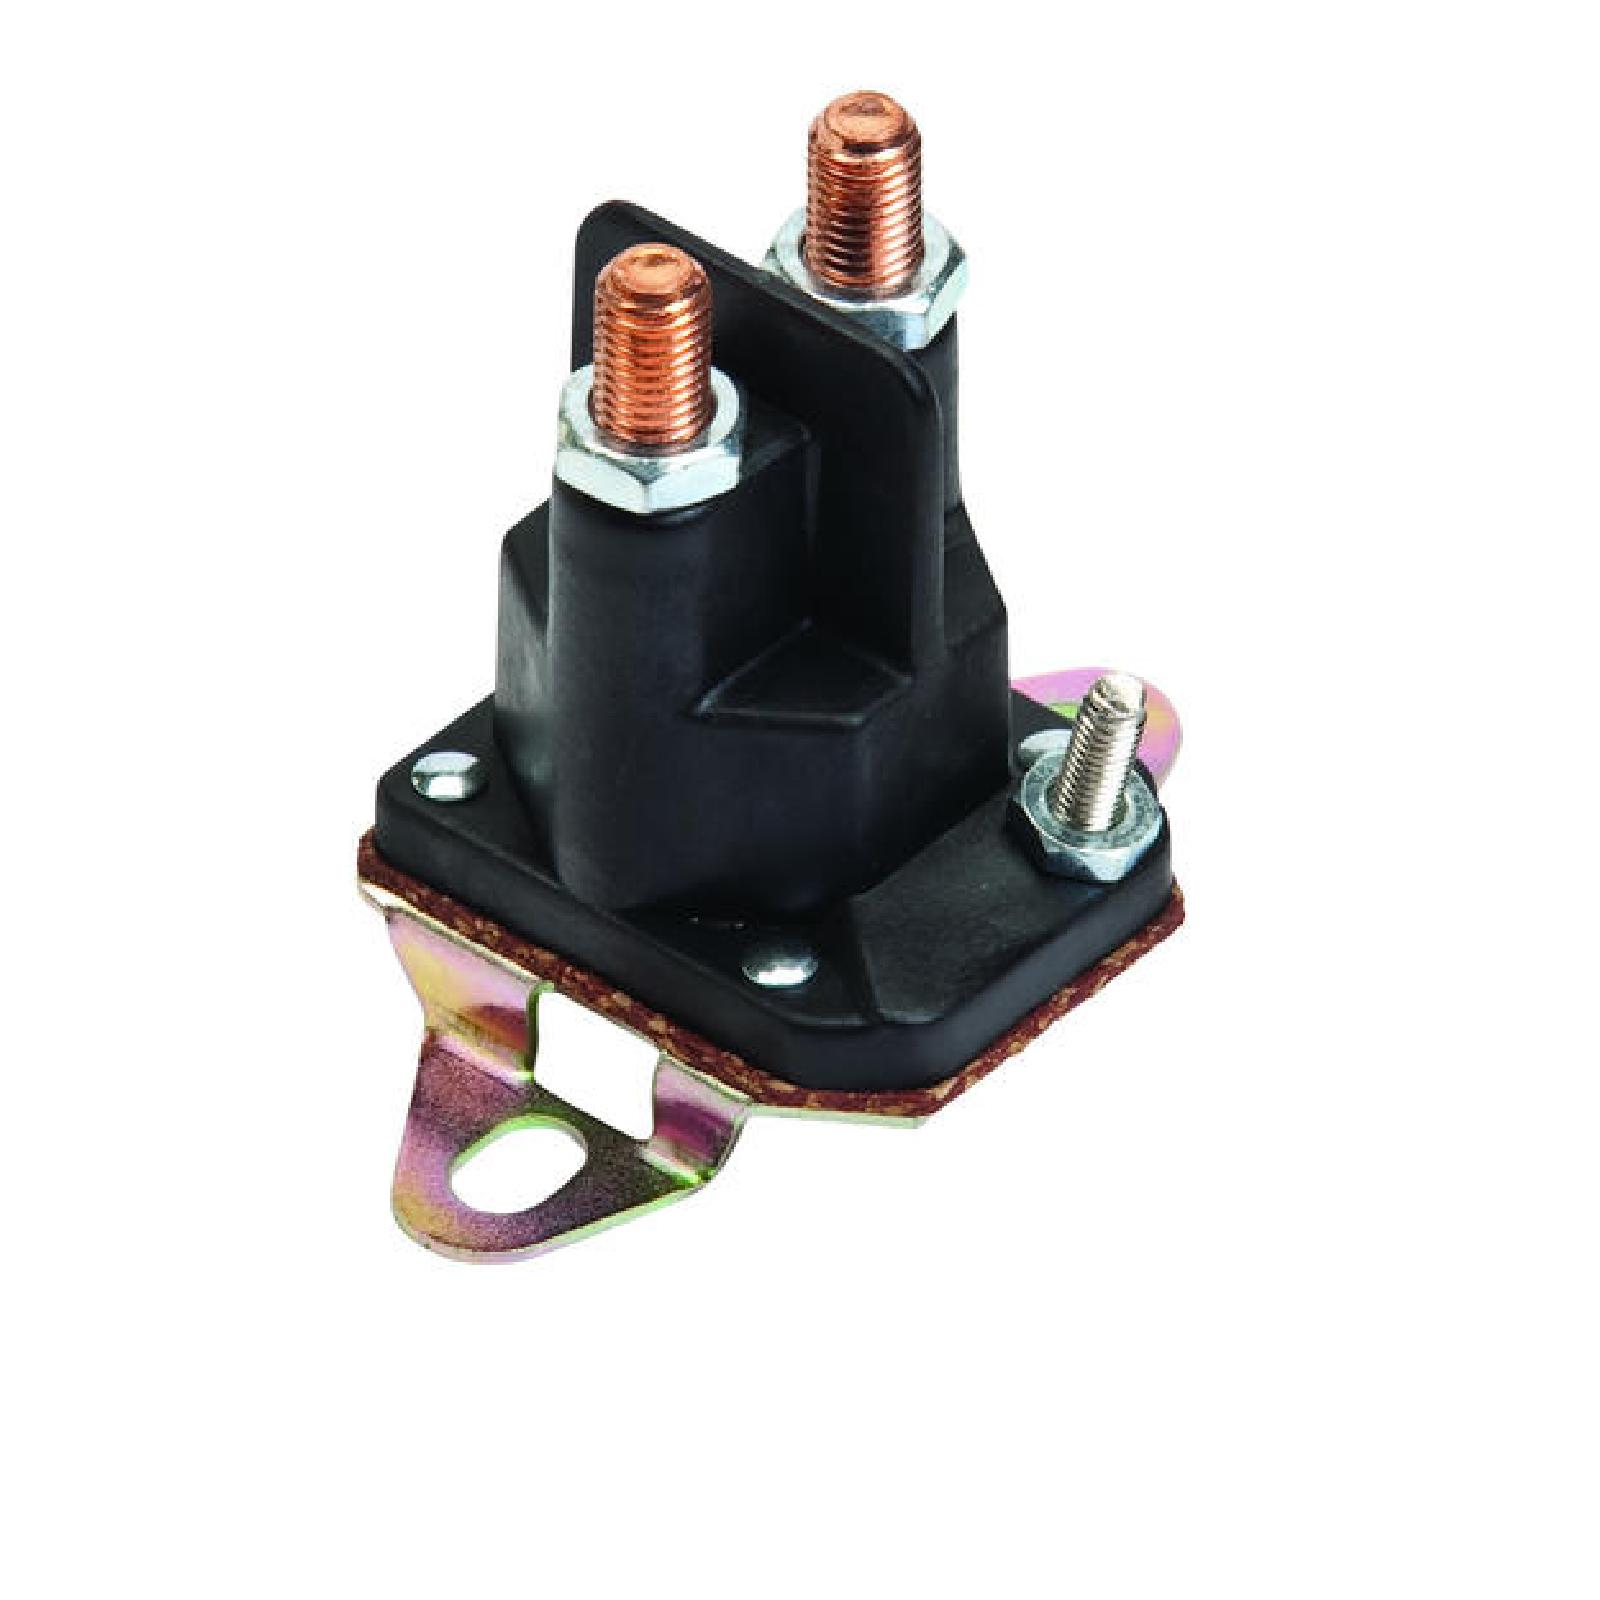 SOLENOID, SNAPPER 3 POST part# 33330 by Oregon